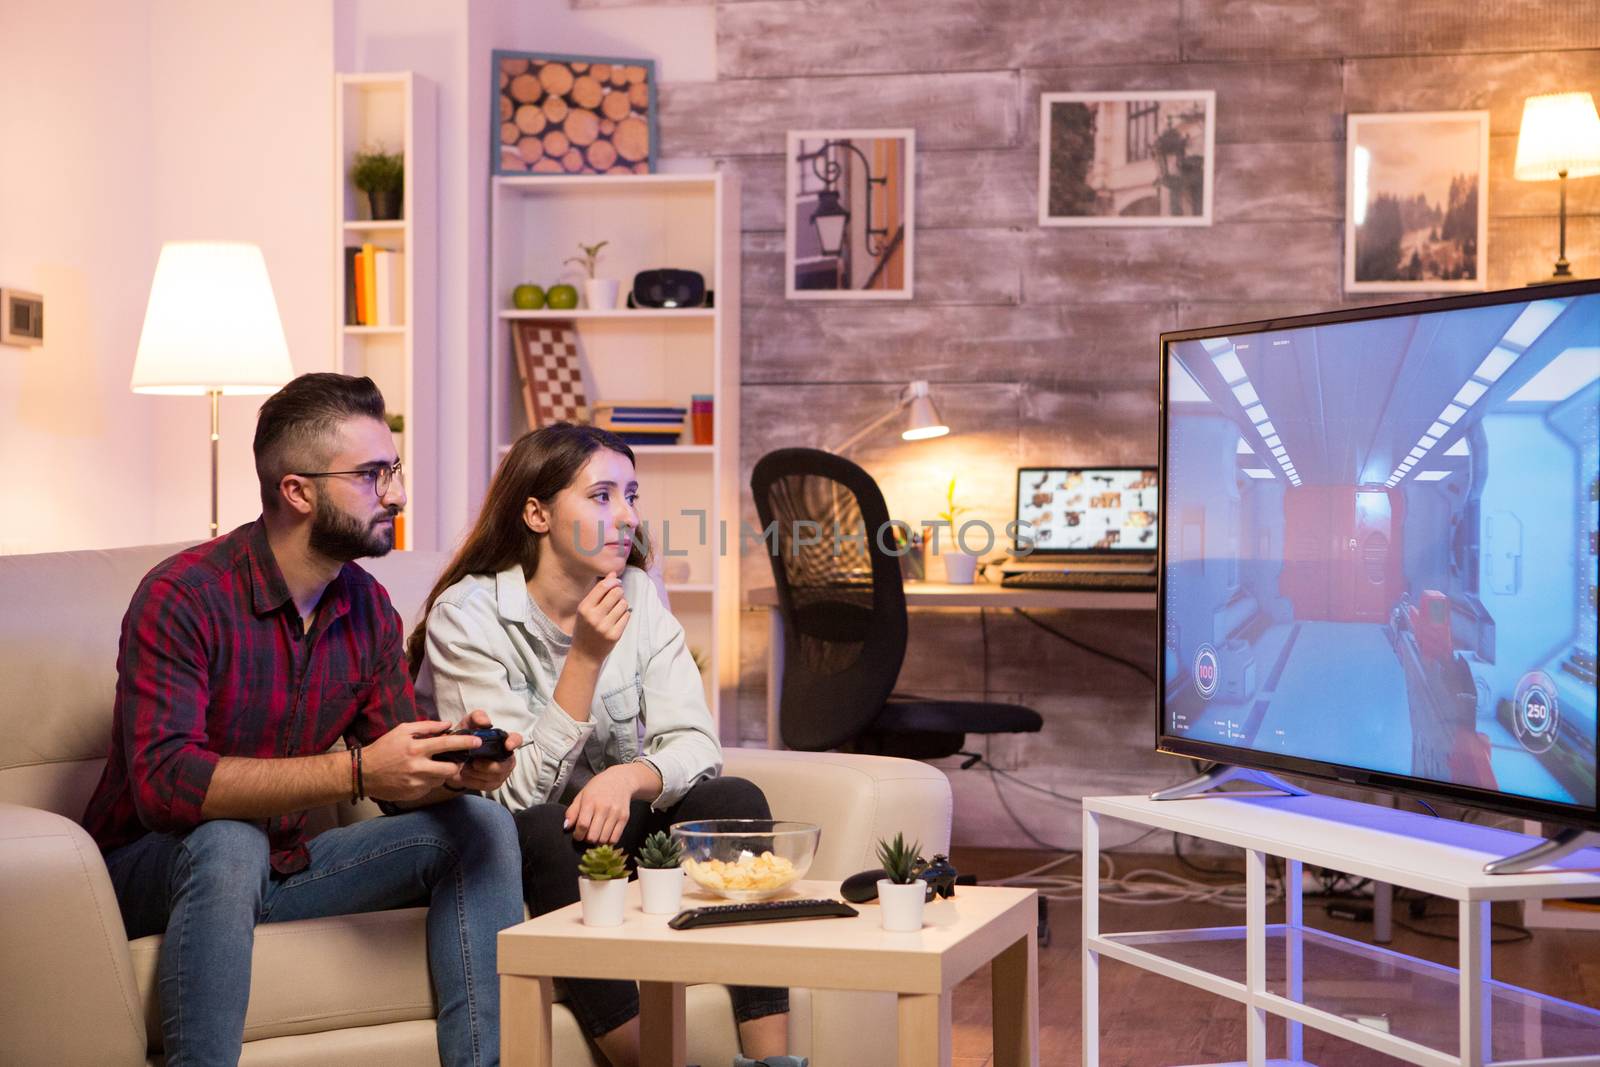 Man sitting on sofa next to his girlfriend and playing video games on television.